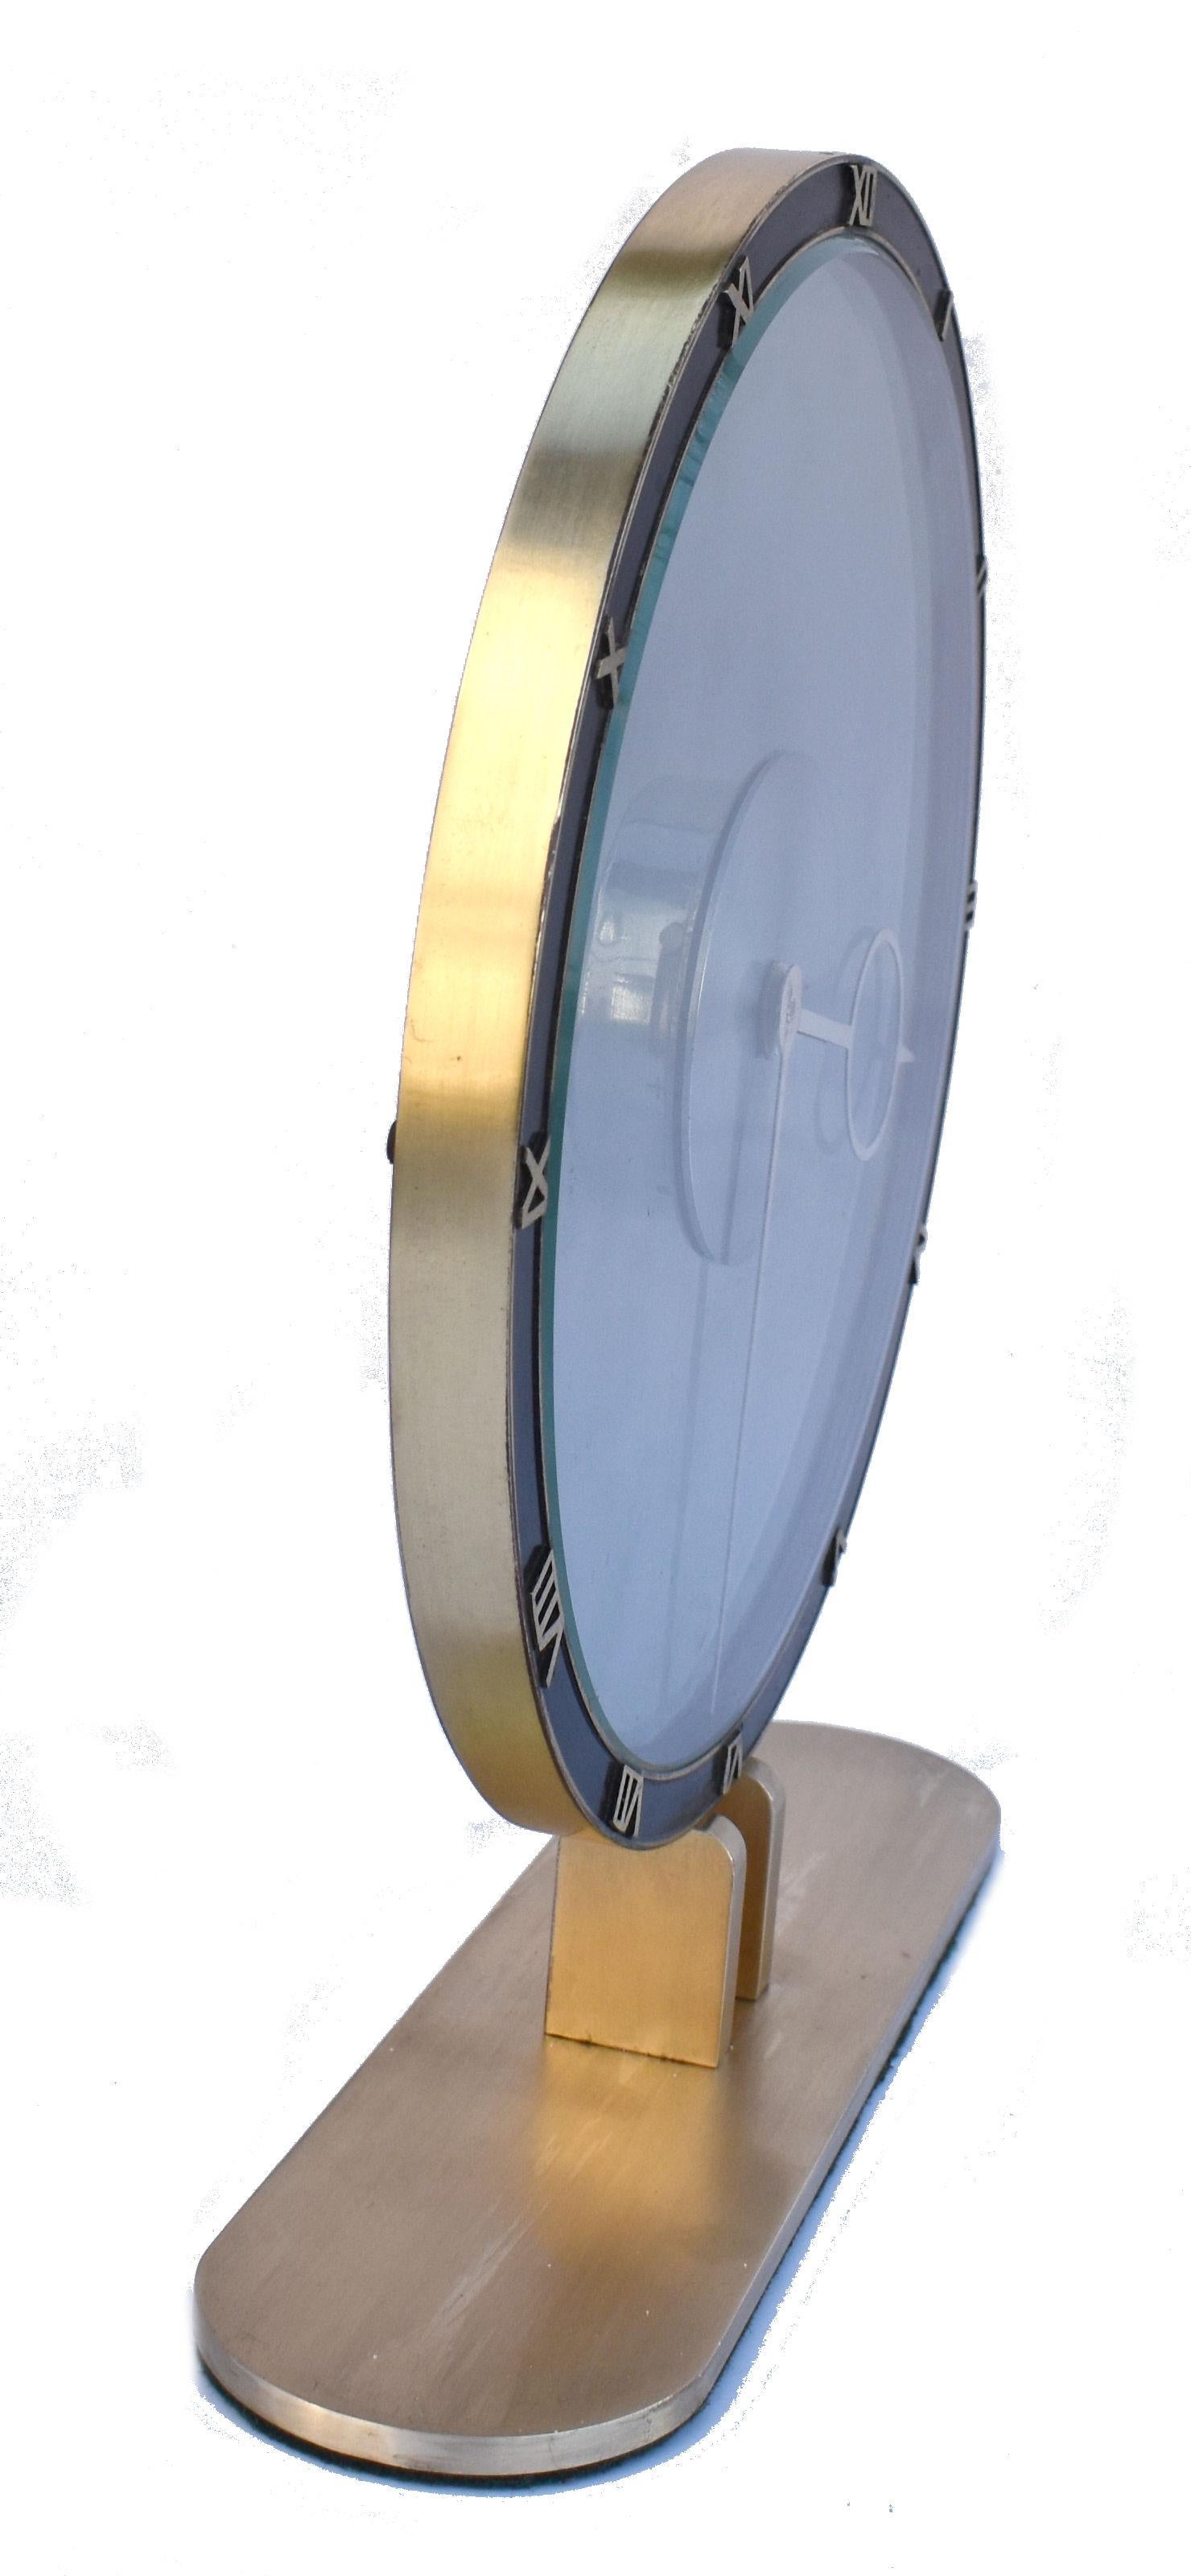 Superbly stylish is this wonderful Art Deco 8 day clock by Kienzel. Beautiful bluey grey colored glass and brass desk timepiece is typical of the 1930s.
The bronze case is highly polished and lacquered. The chapter ring with raised brass Roman